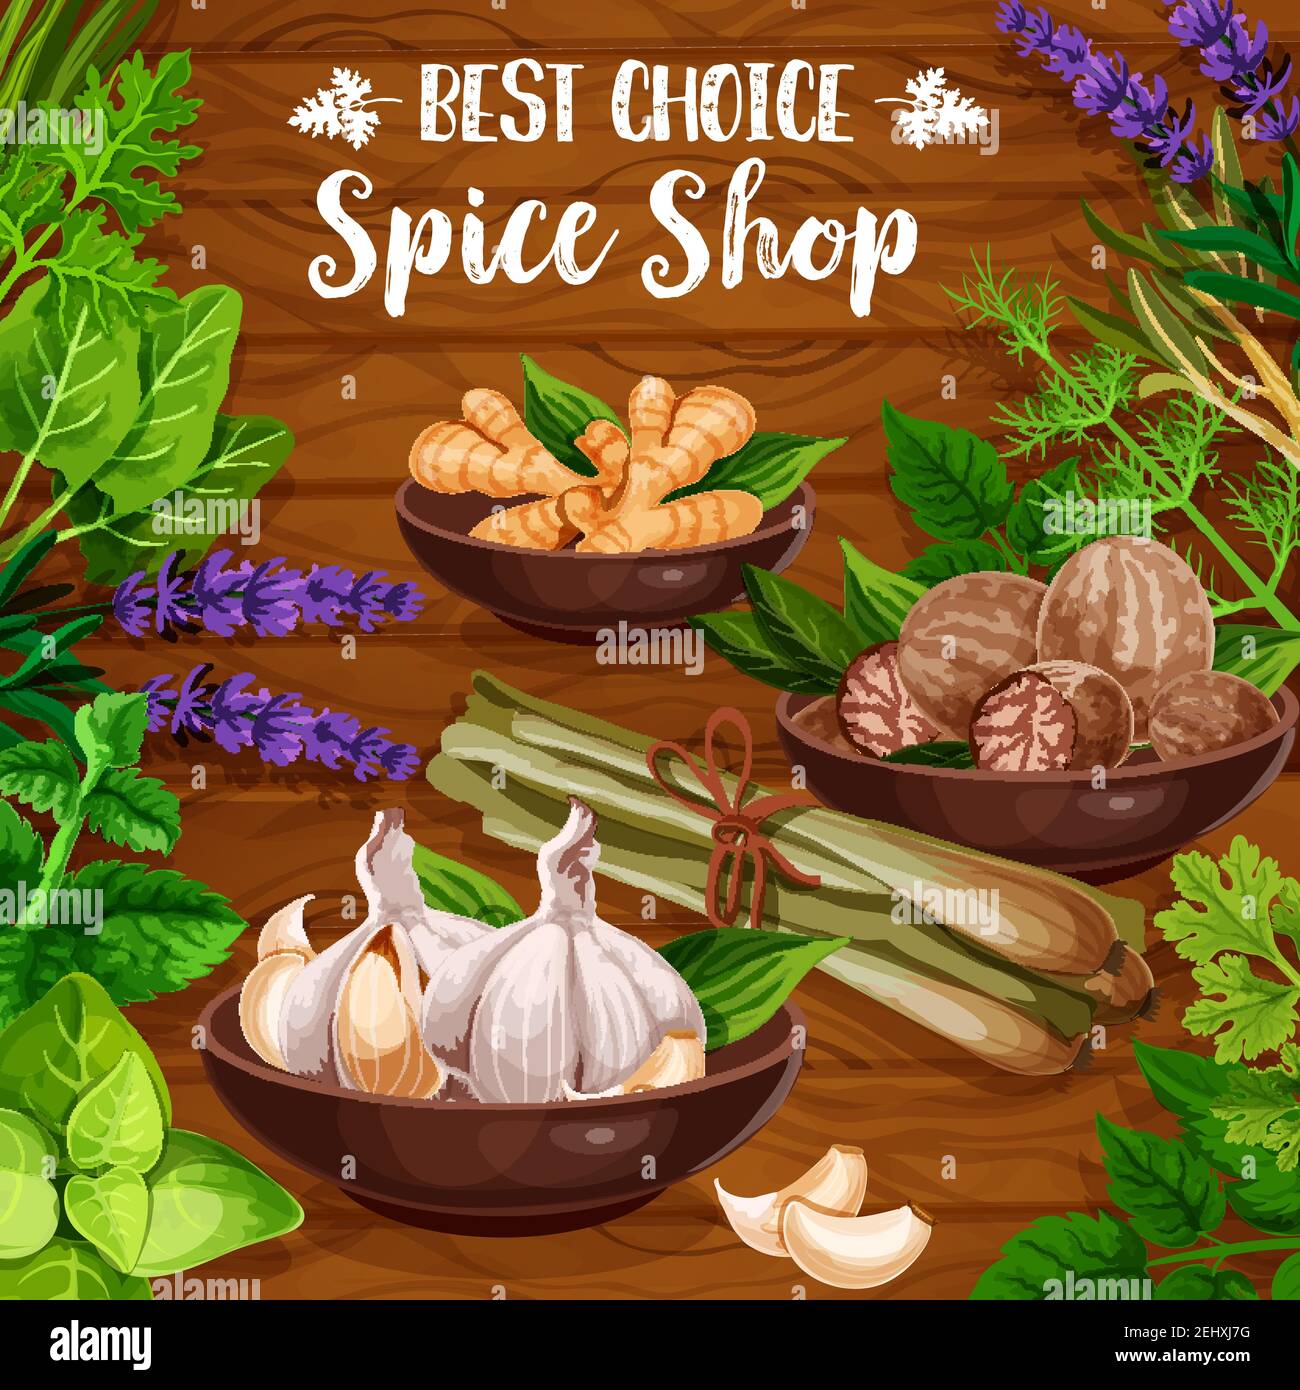 https://c8.alamy.com/comp/2EHXJ7G/cooking-spices-culinary-seasonings-and-herbs-vector-organic-natural-herbal-flavorings-garlic-ginger-or-nutmeg-and-sage-or-bay-leaf-lavender-or-lem-2EHXJ7G.jpg